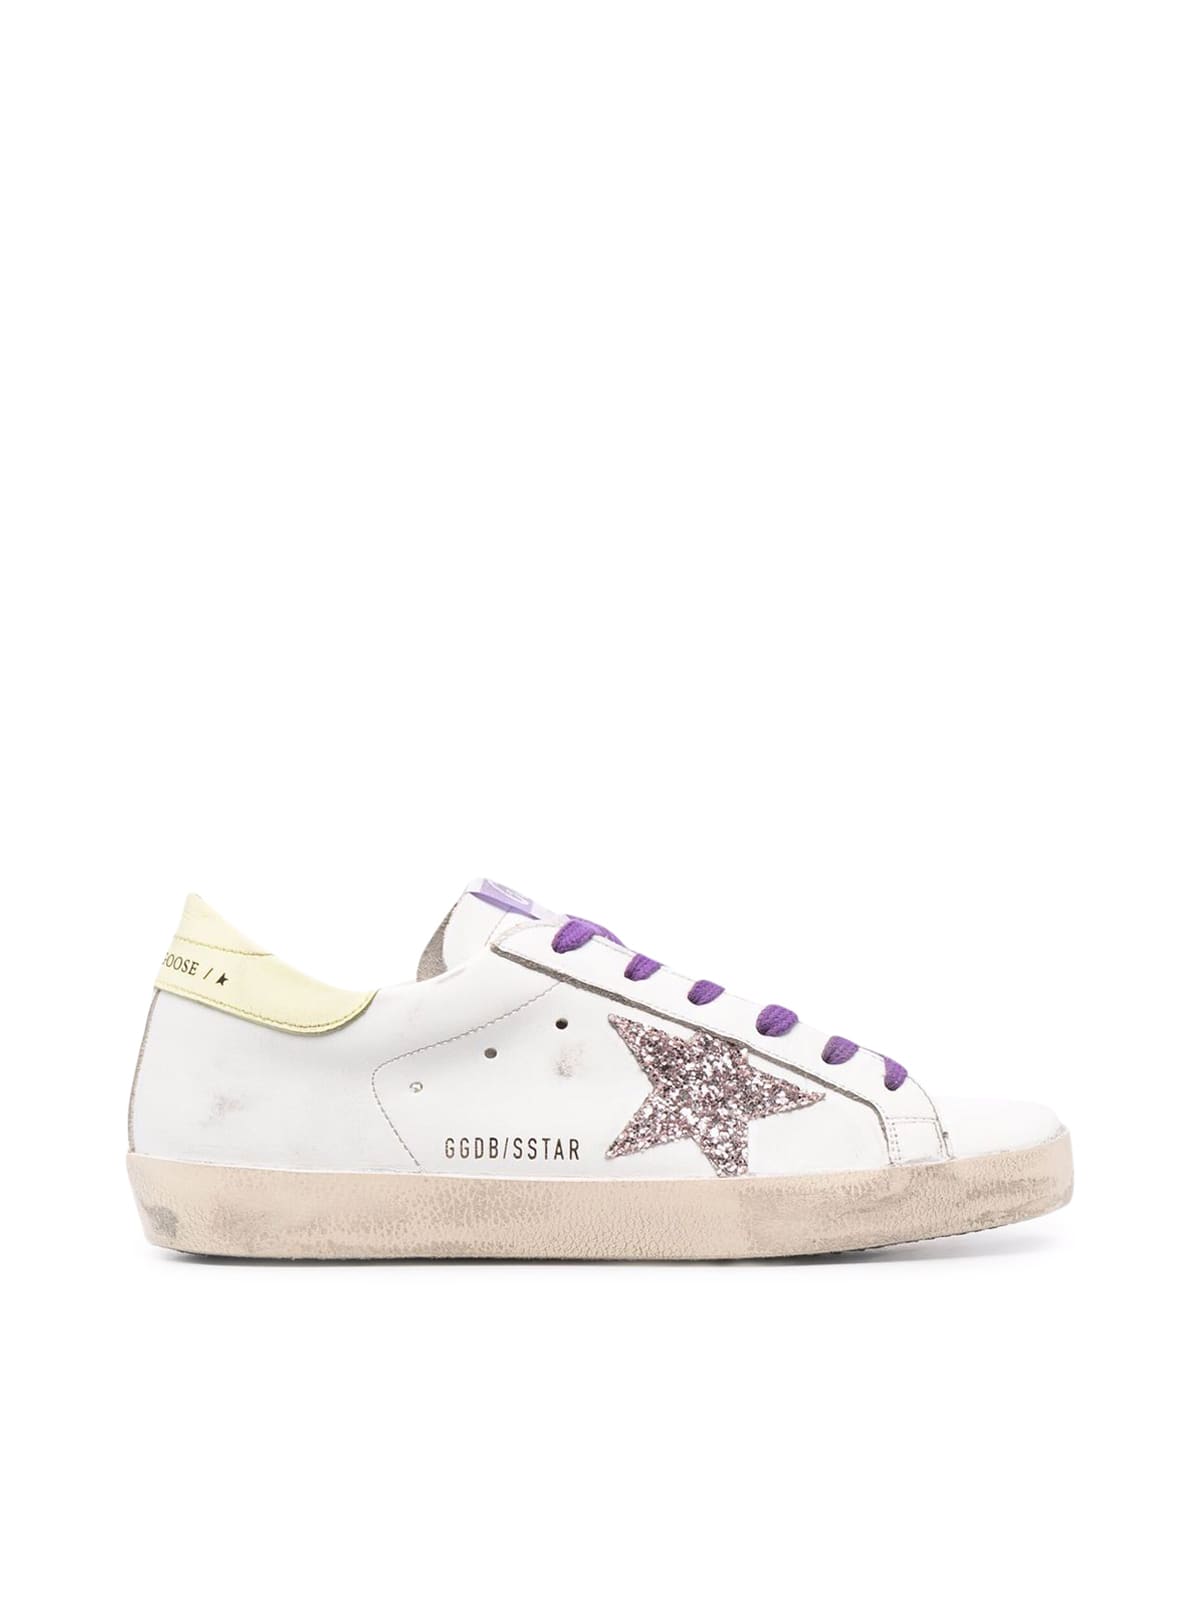 Buy Golden Goose Super-star Leather Upper And Heel Glitter Star online, shop Golden Goose shoes with free shipping